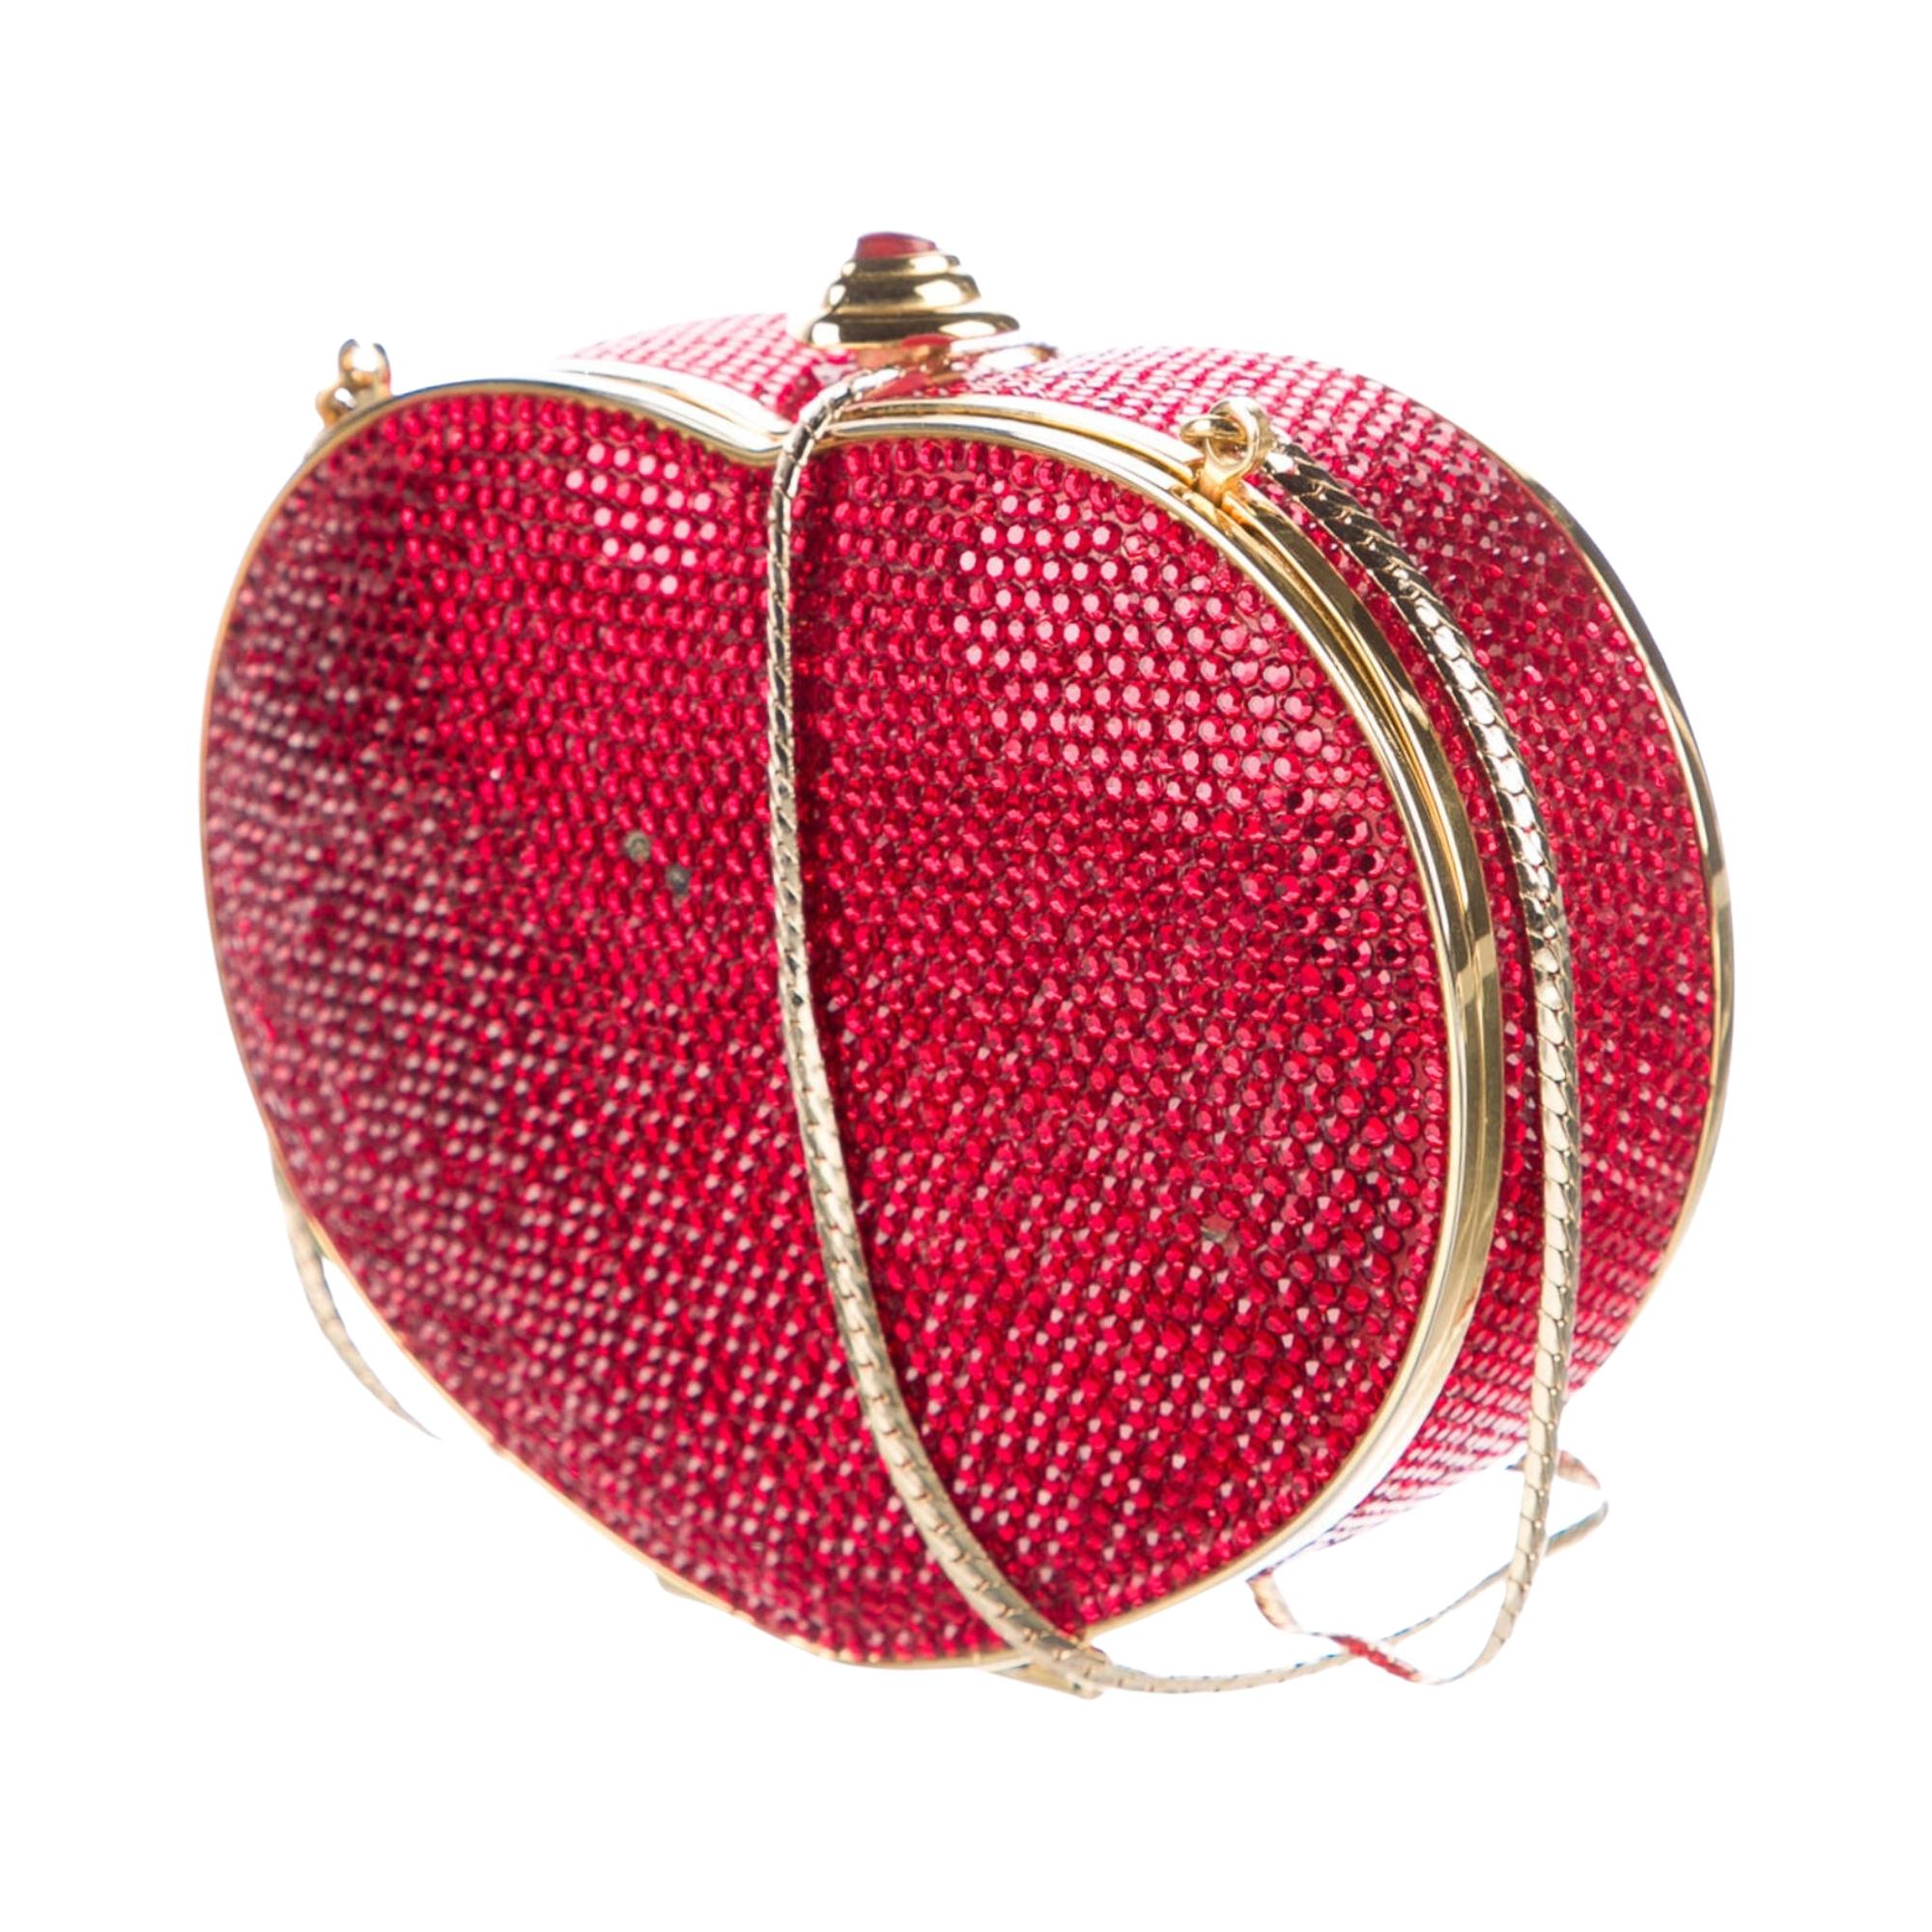 Judith Leiber Minaudière.Red Crystal. Gold-Tone Hardware. Chain-Link Shoulder Strap. Leather Lining. Push-Lock Closure at Top. Handbags are final sale and are not returnable.

Height 4